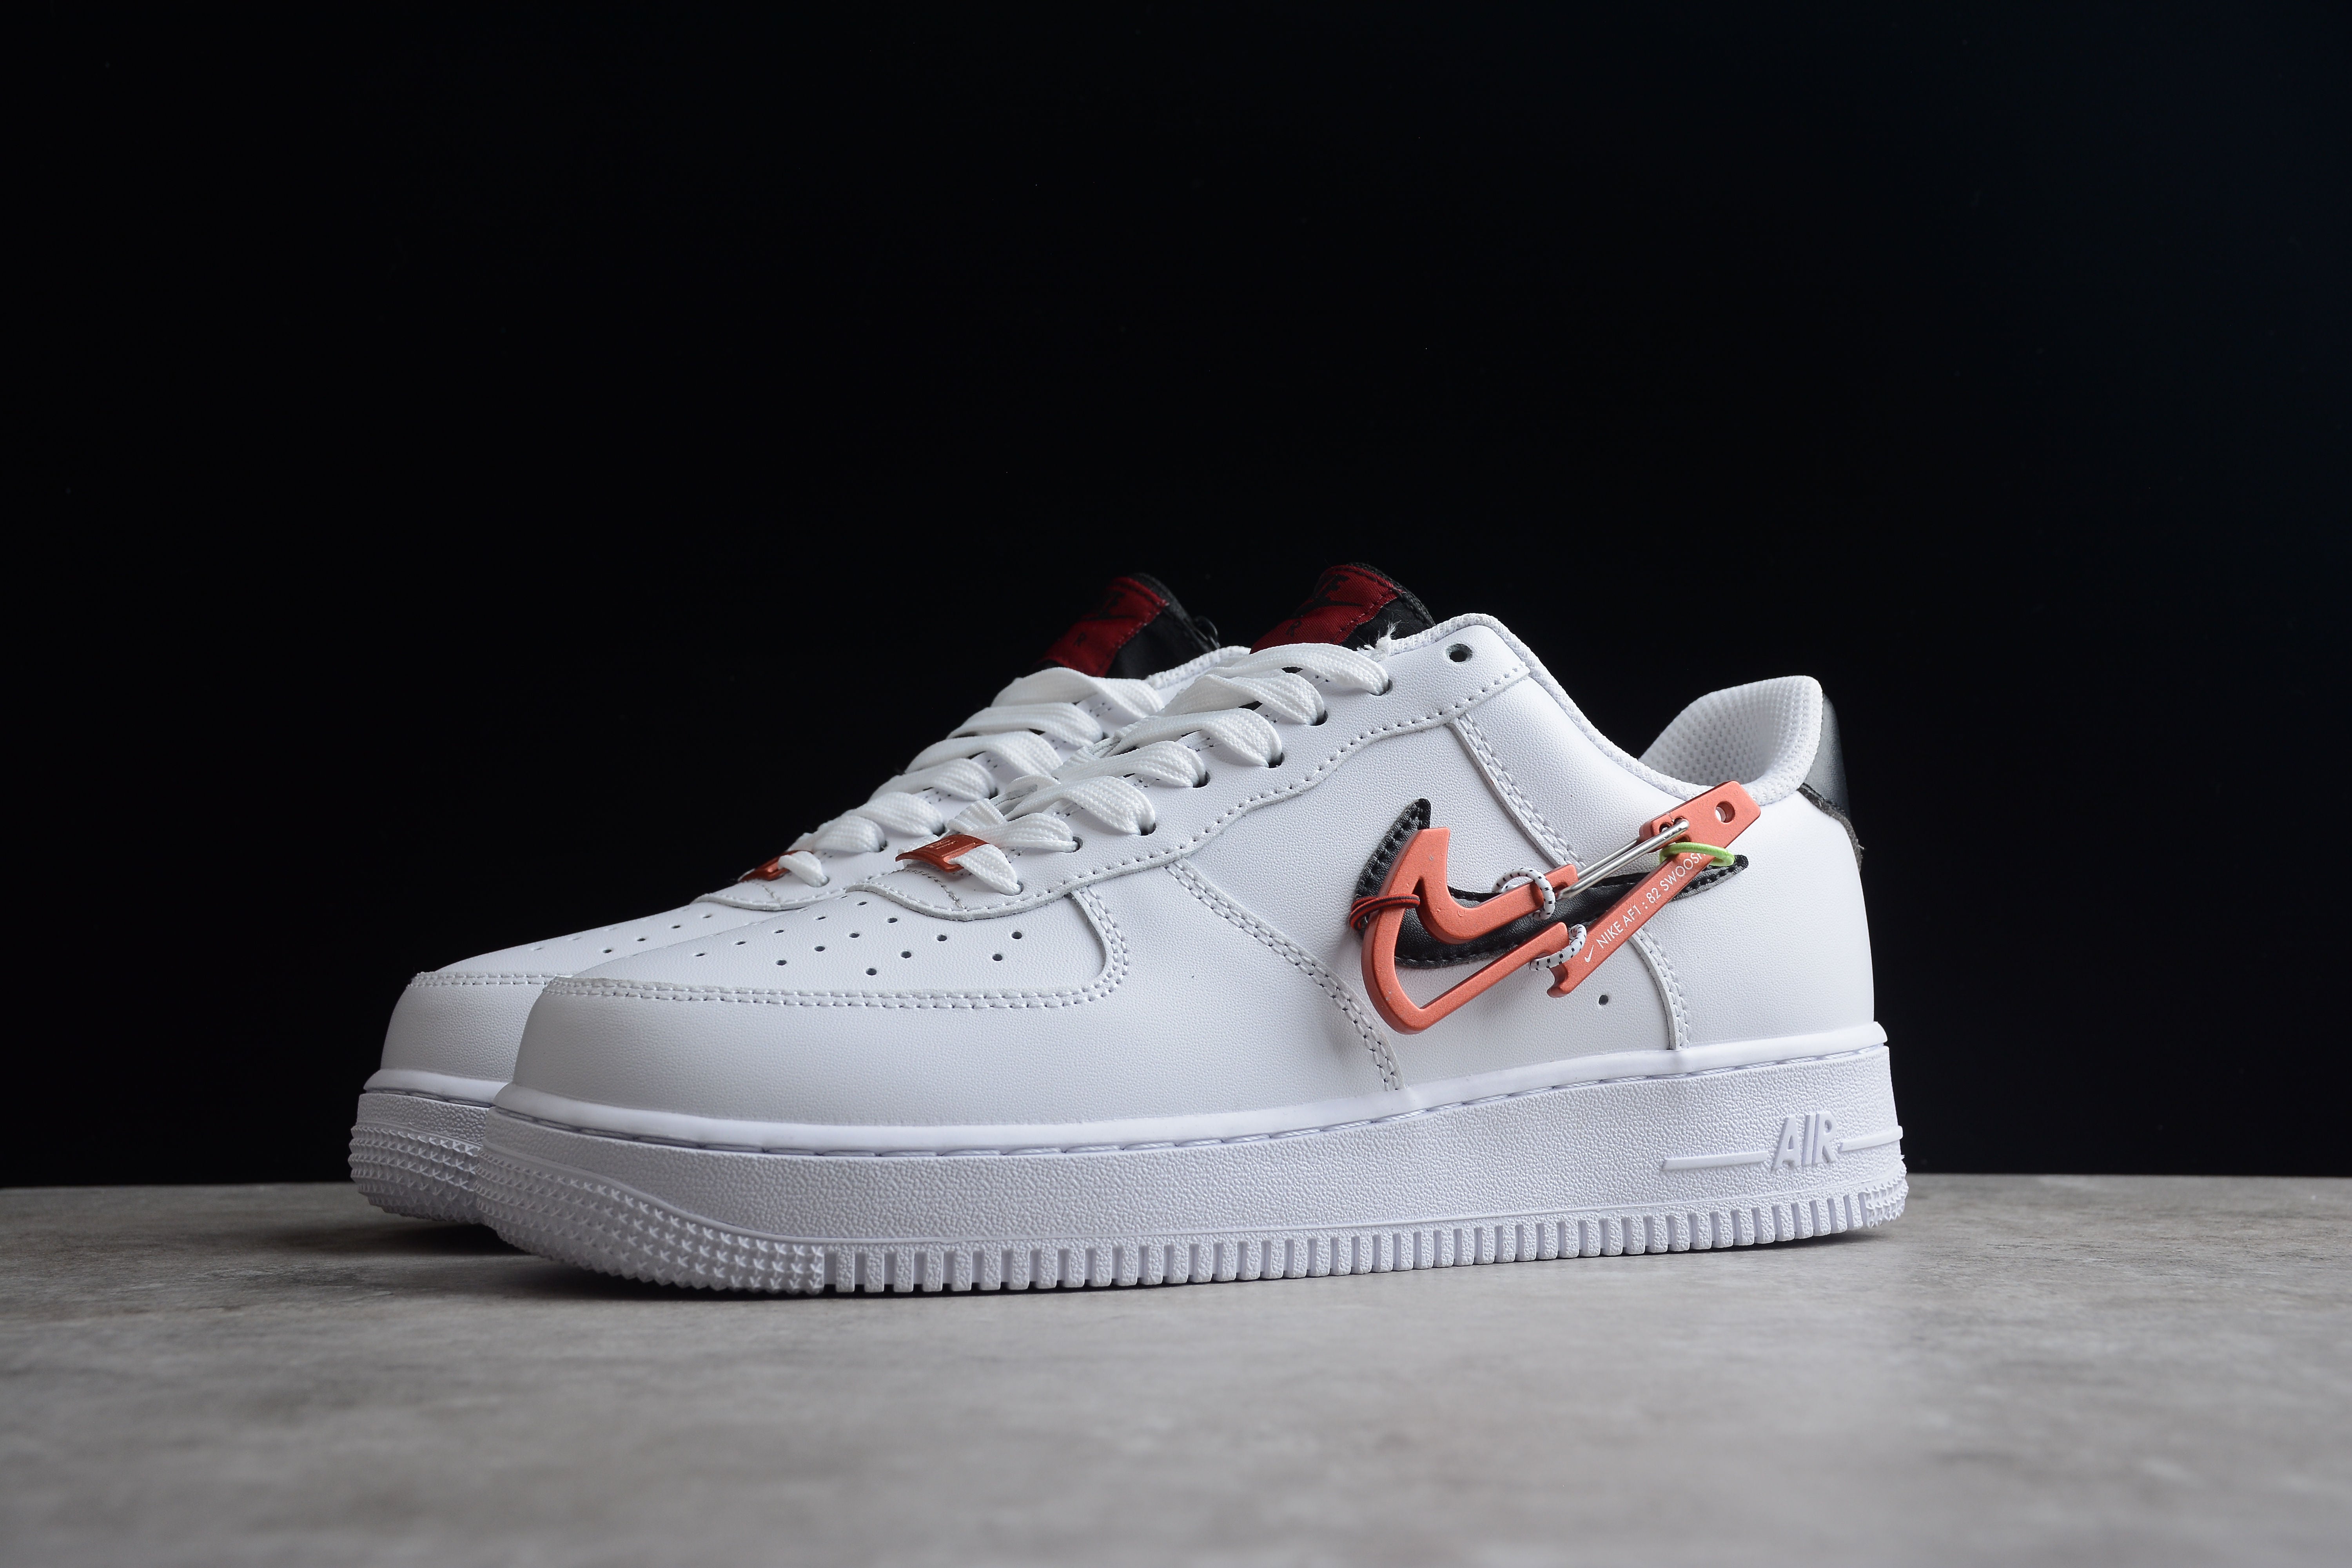 Nike airforce A1 3D shoes